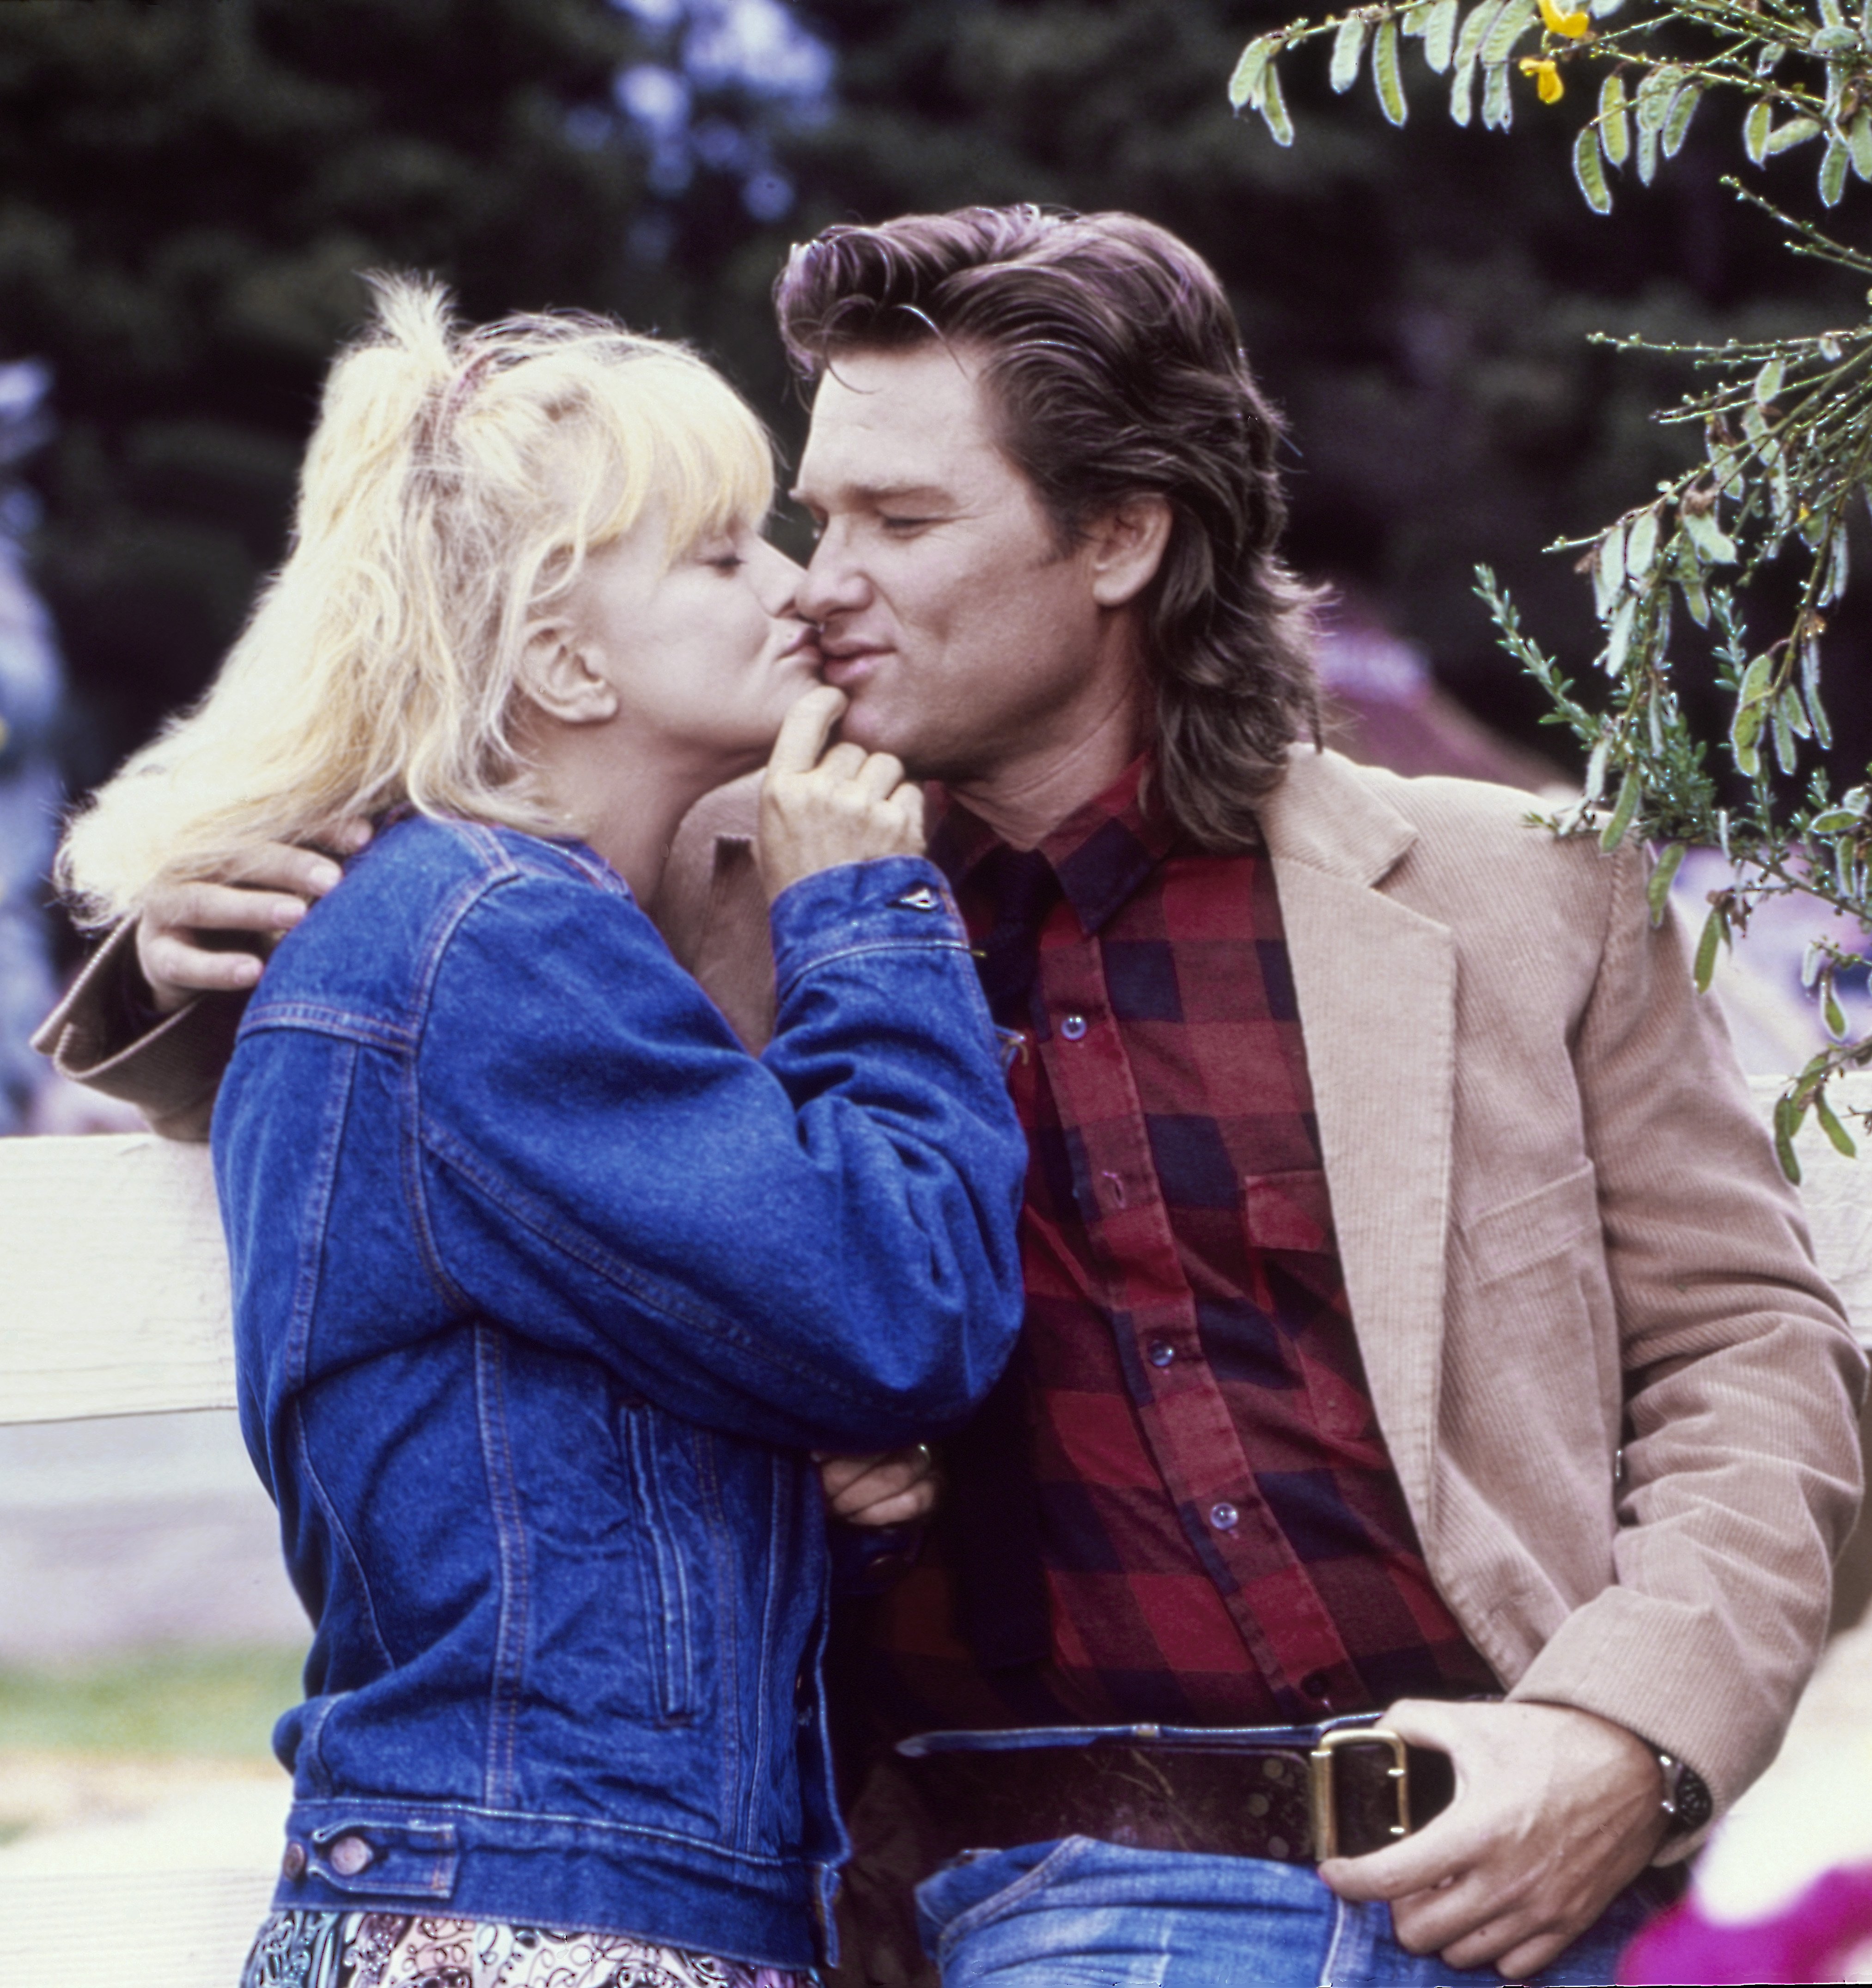 Goldie Hawn and Kurt Russell in October 1987 in Fort Bragg, California | Source: Getty Images